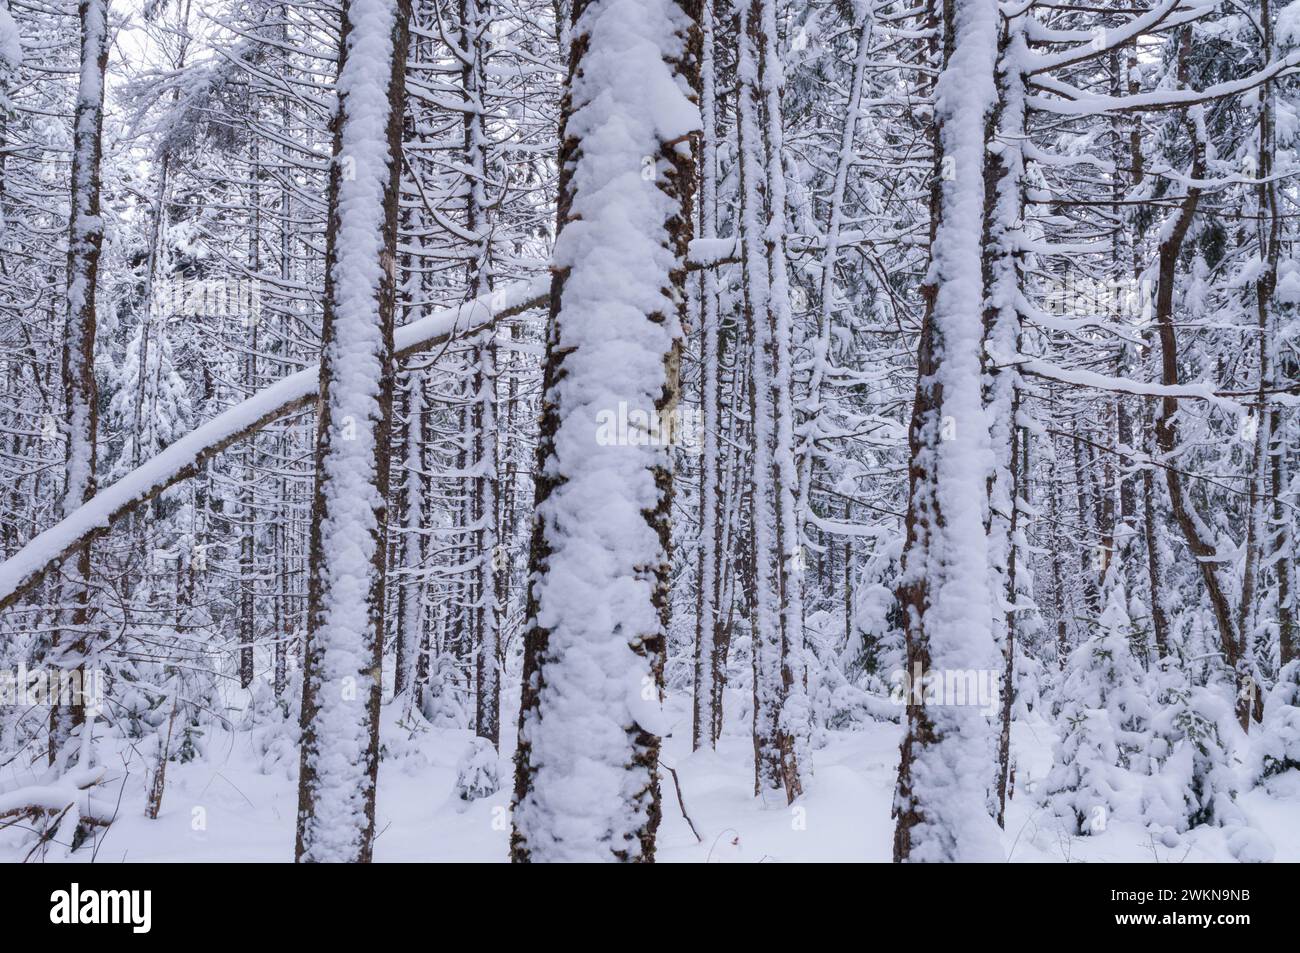 Balsam Fir (Abies balsamea) after a snow storm in the Adirondack Mountains Of New York State Stock Photo